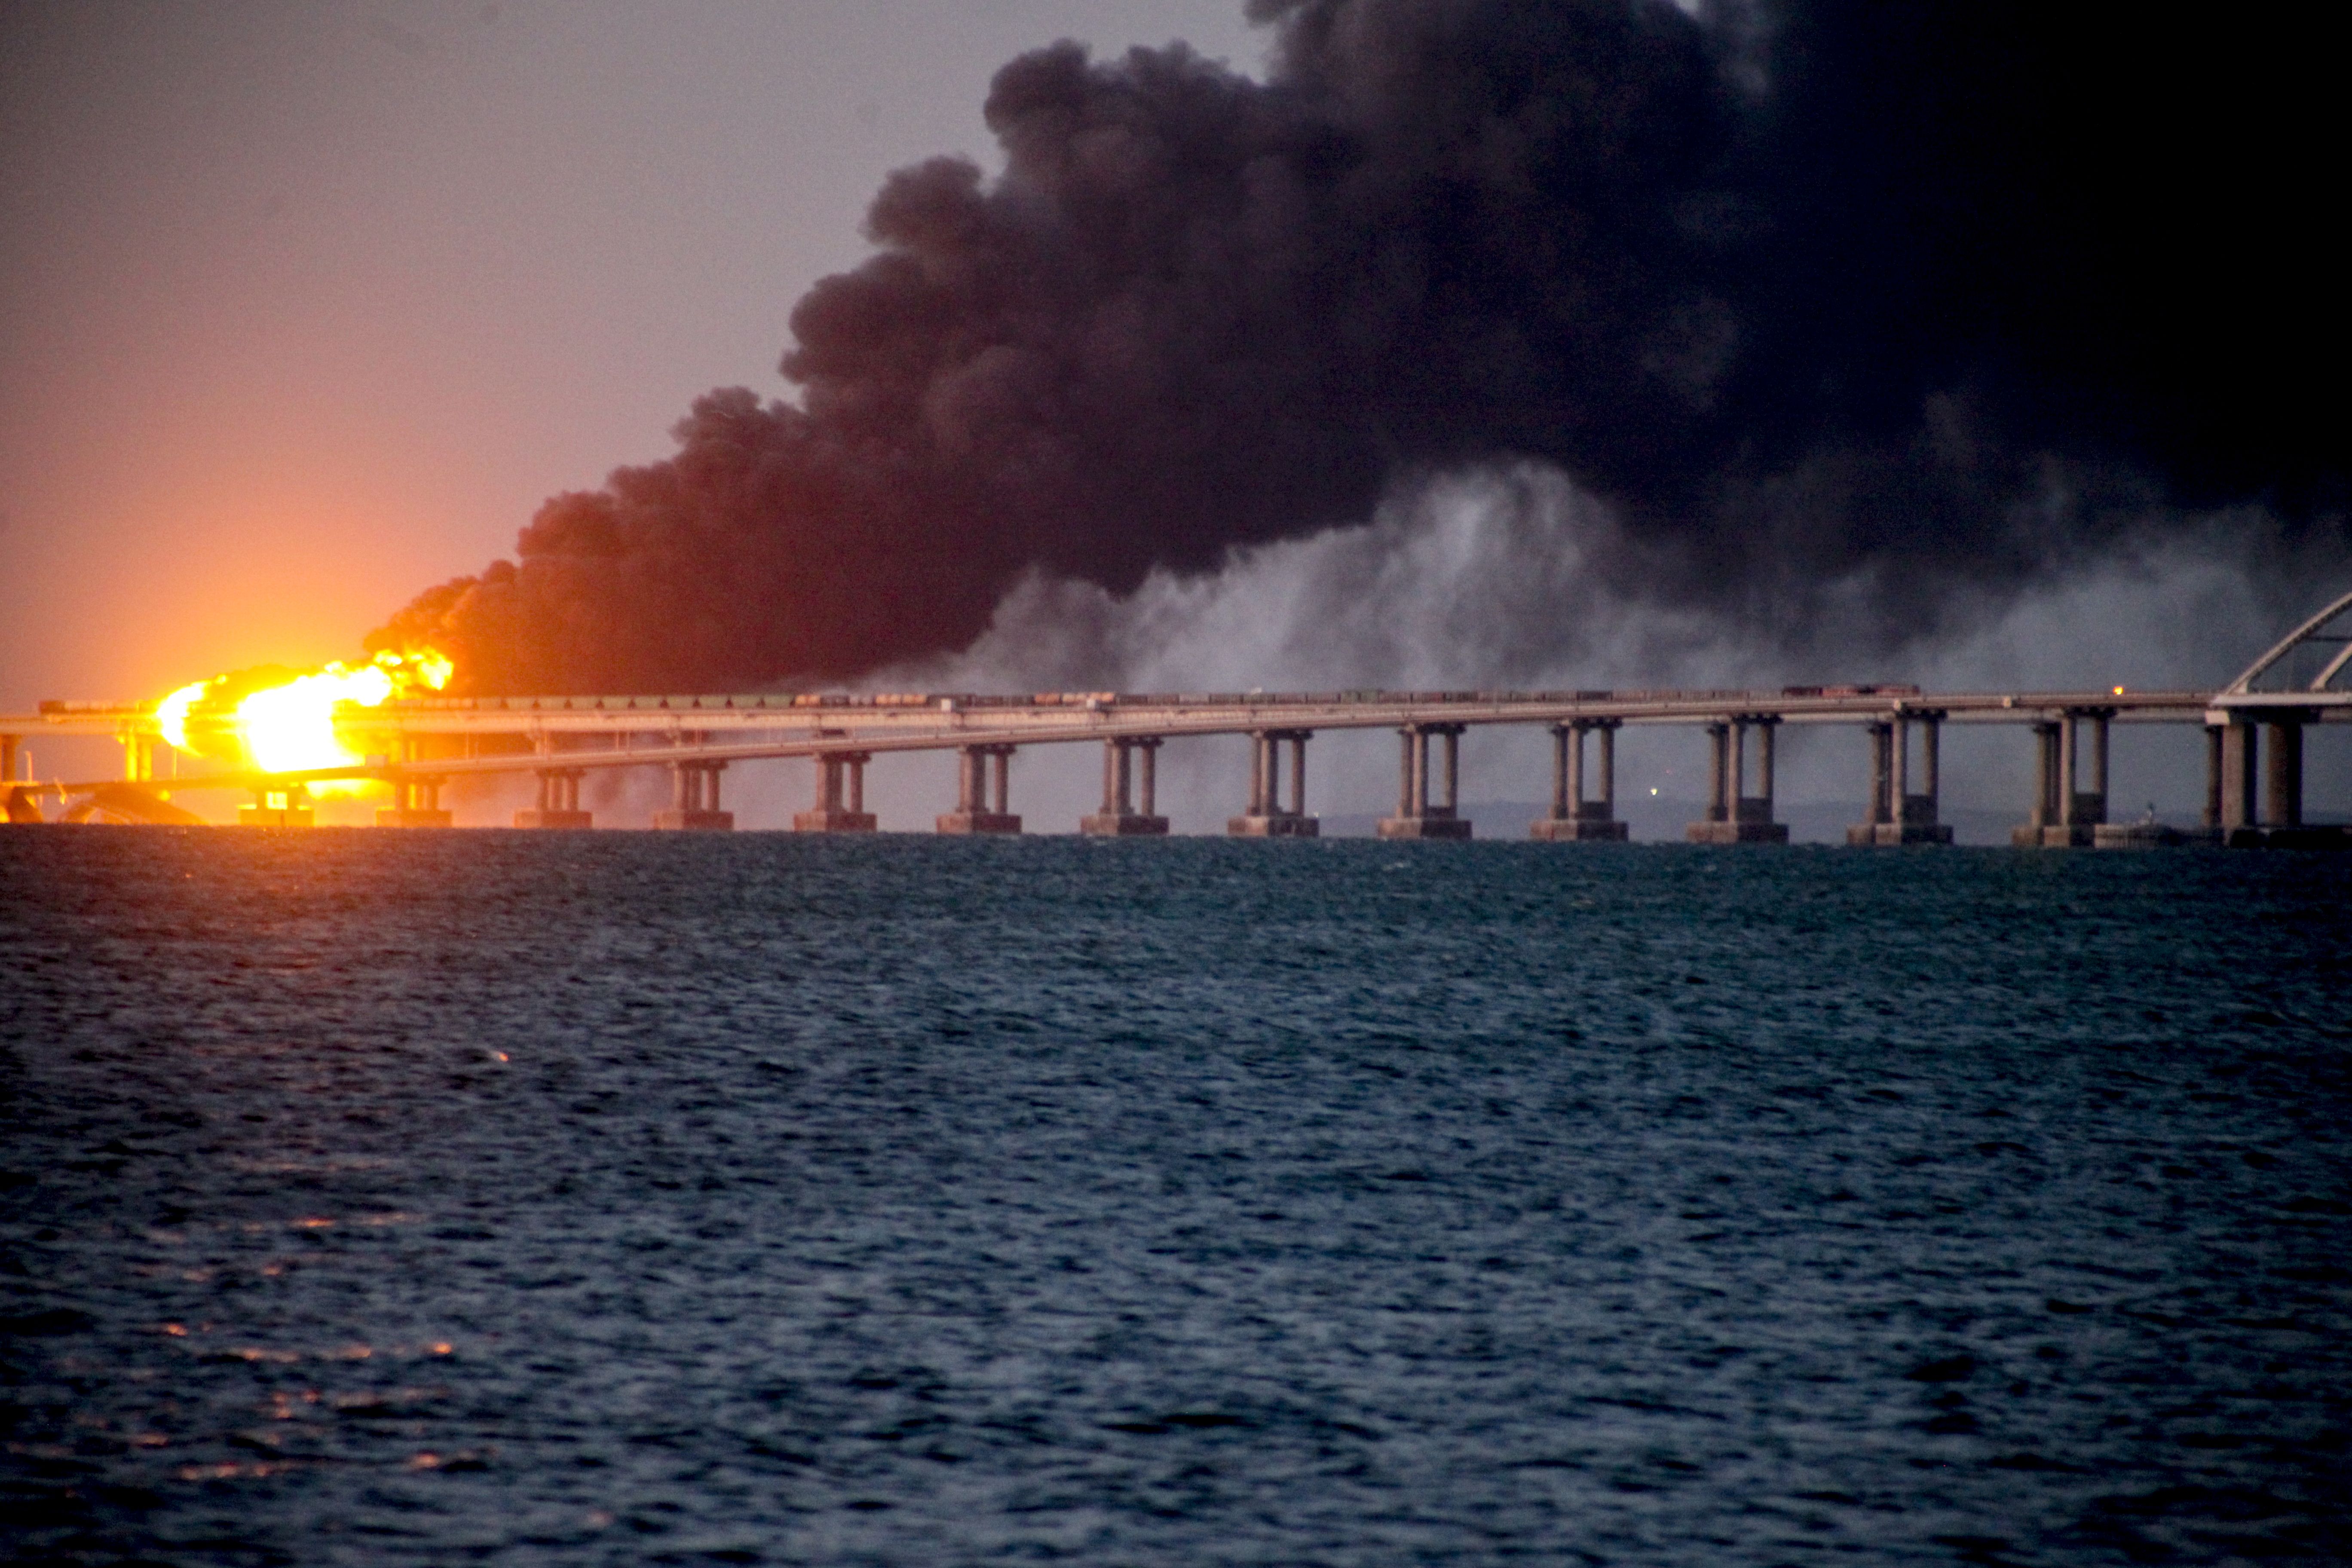 Explosion causes fire at the Kerch bridge in the Kerch Strait, Crimea.